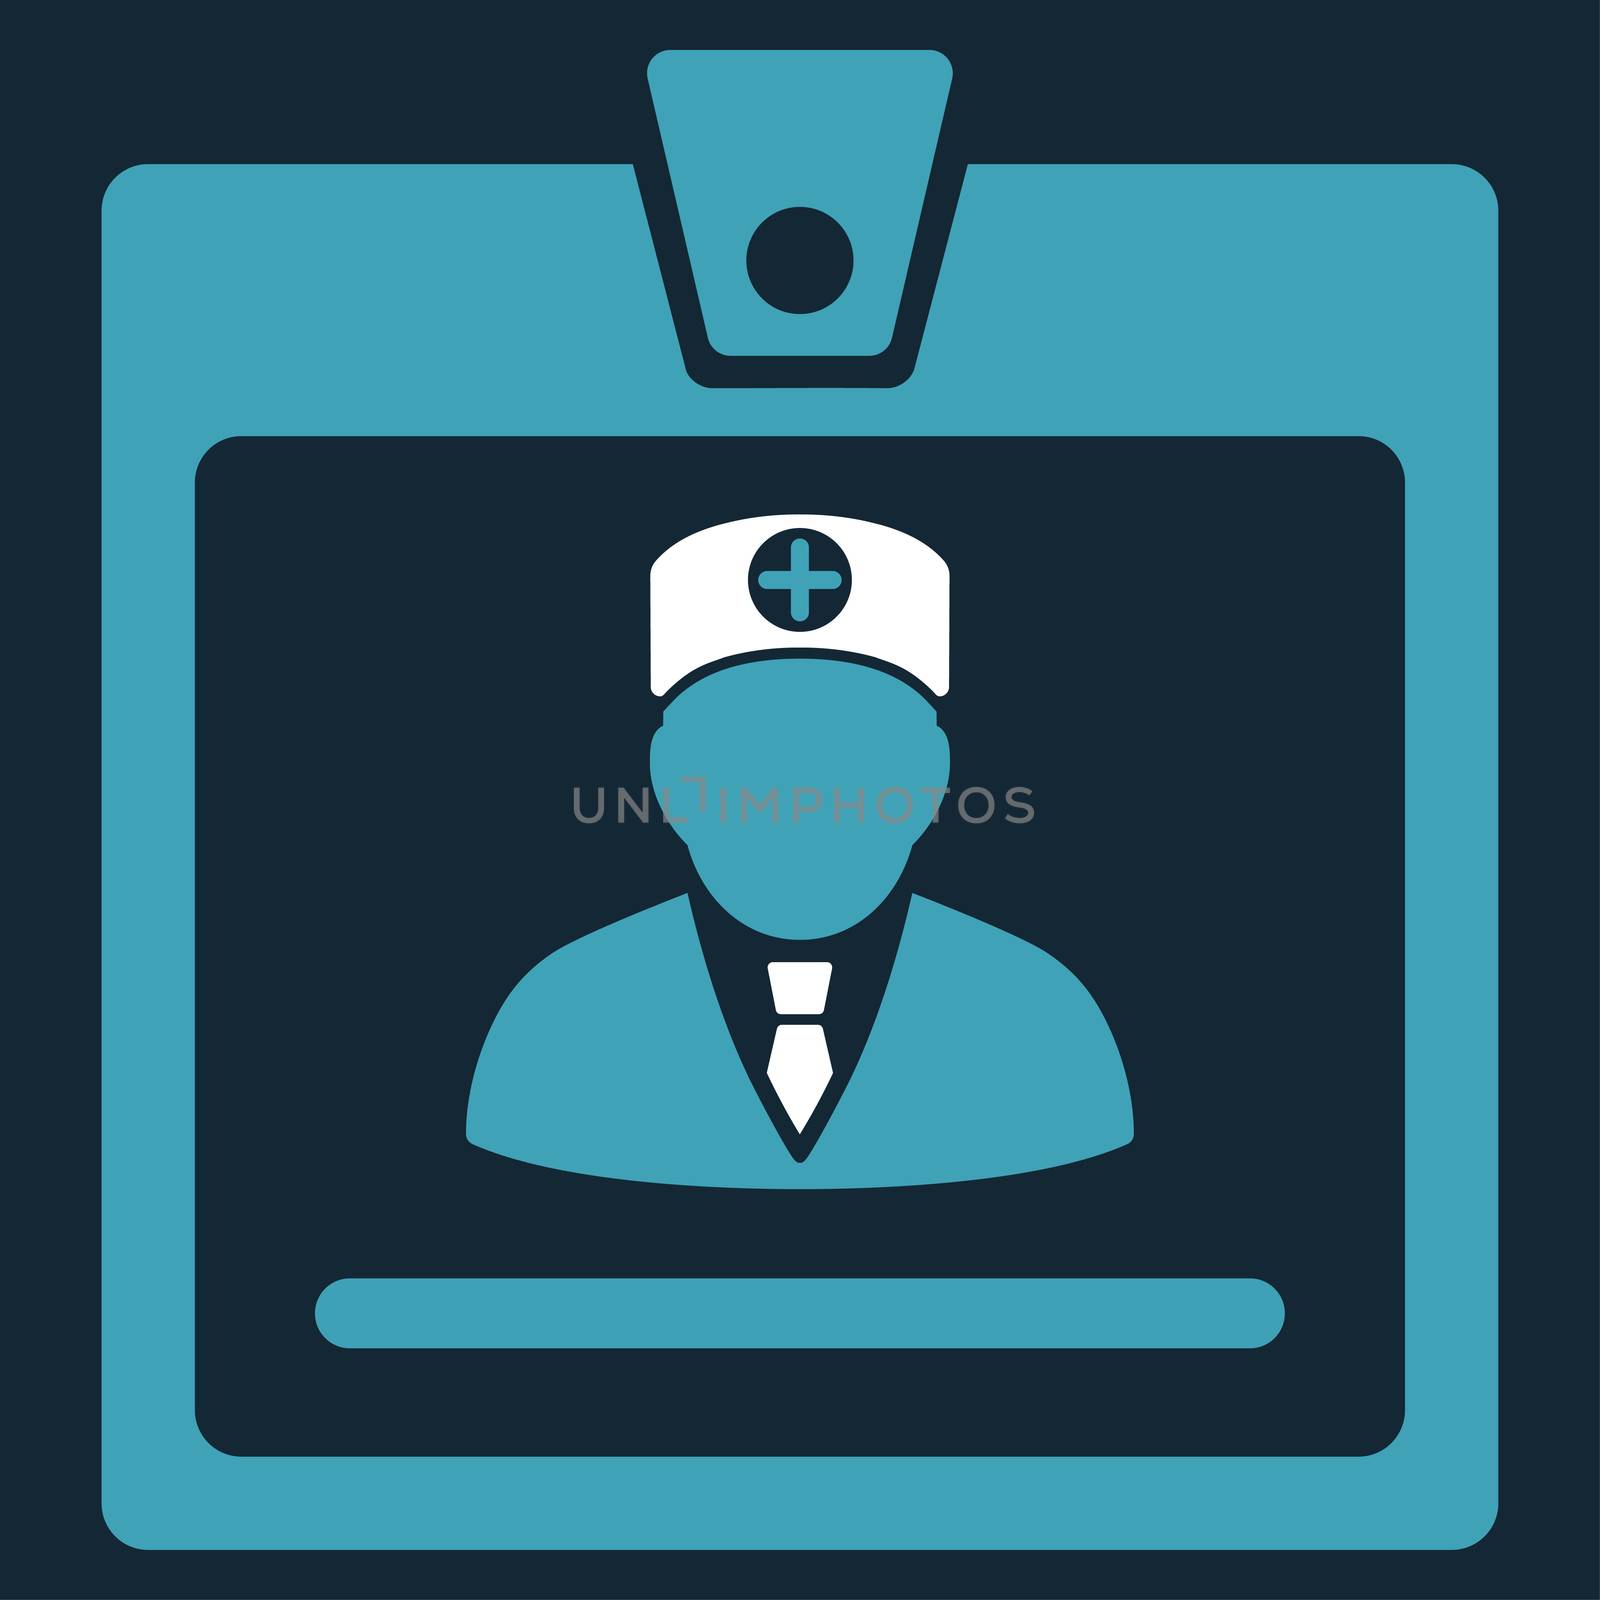 Doctor Badge raster icon. Style is bicolor flat symbol, blue and white colors, rounded angles, dark blue background.